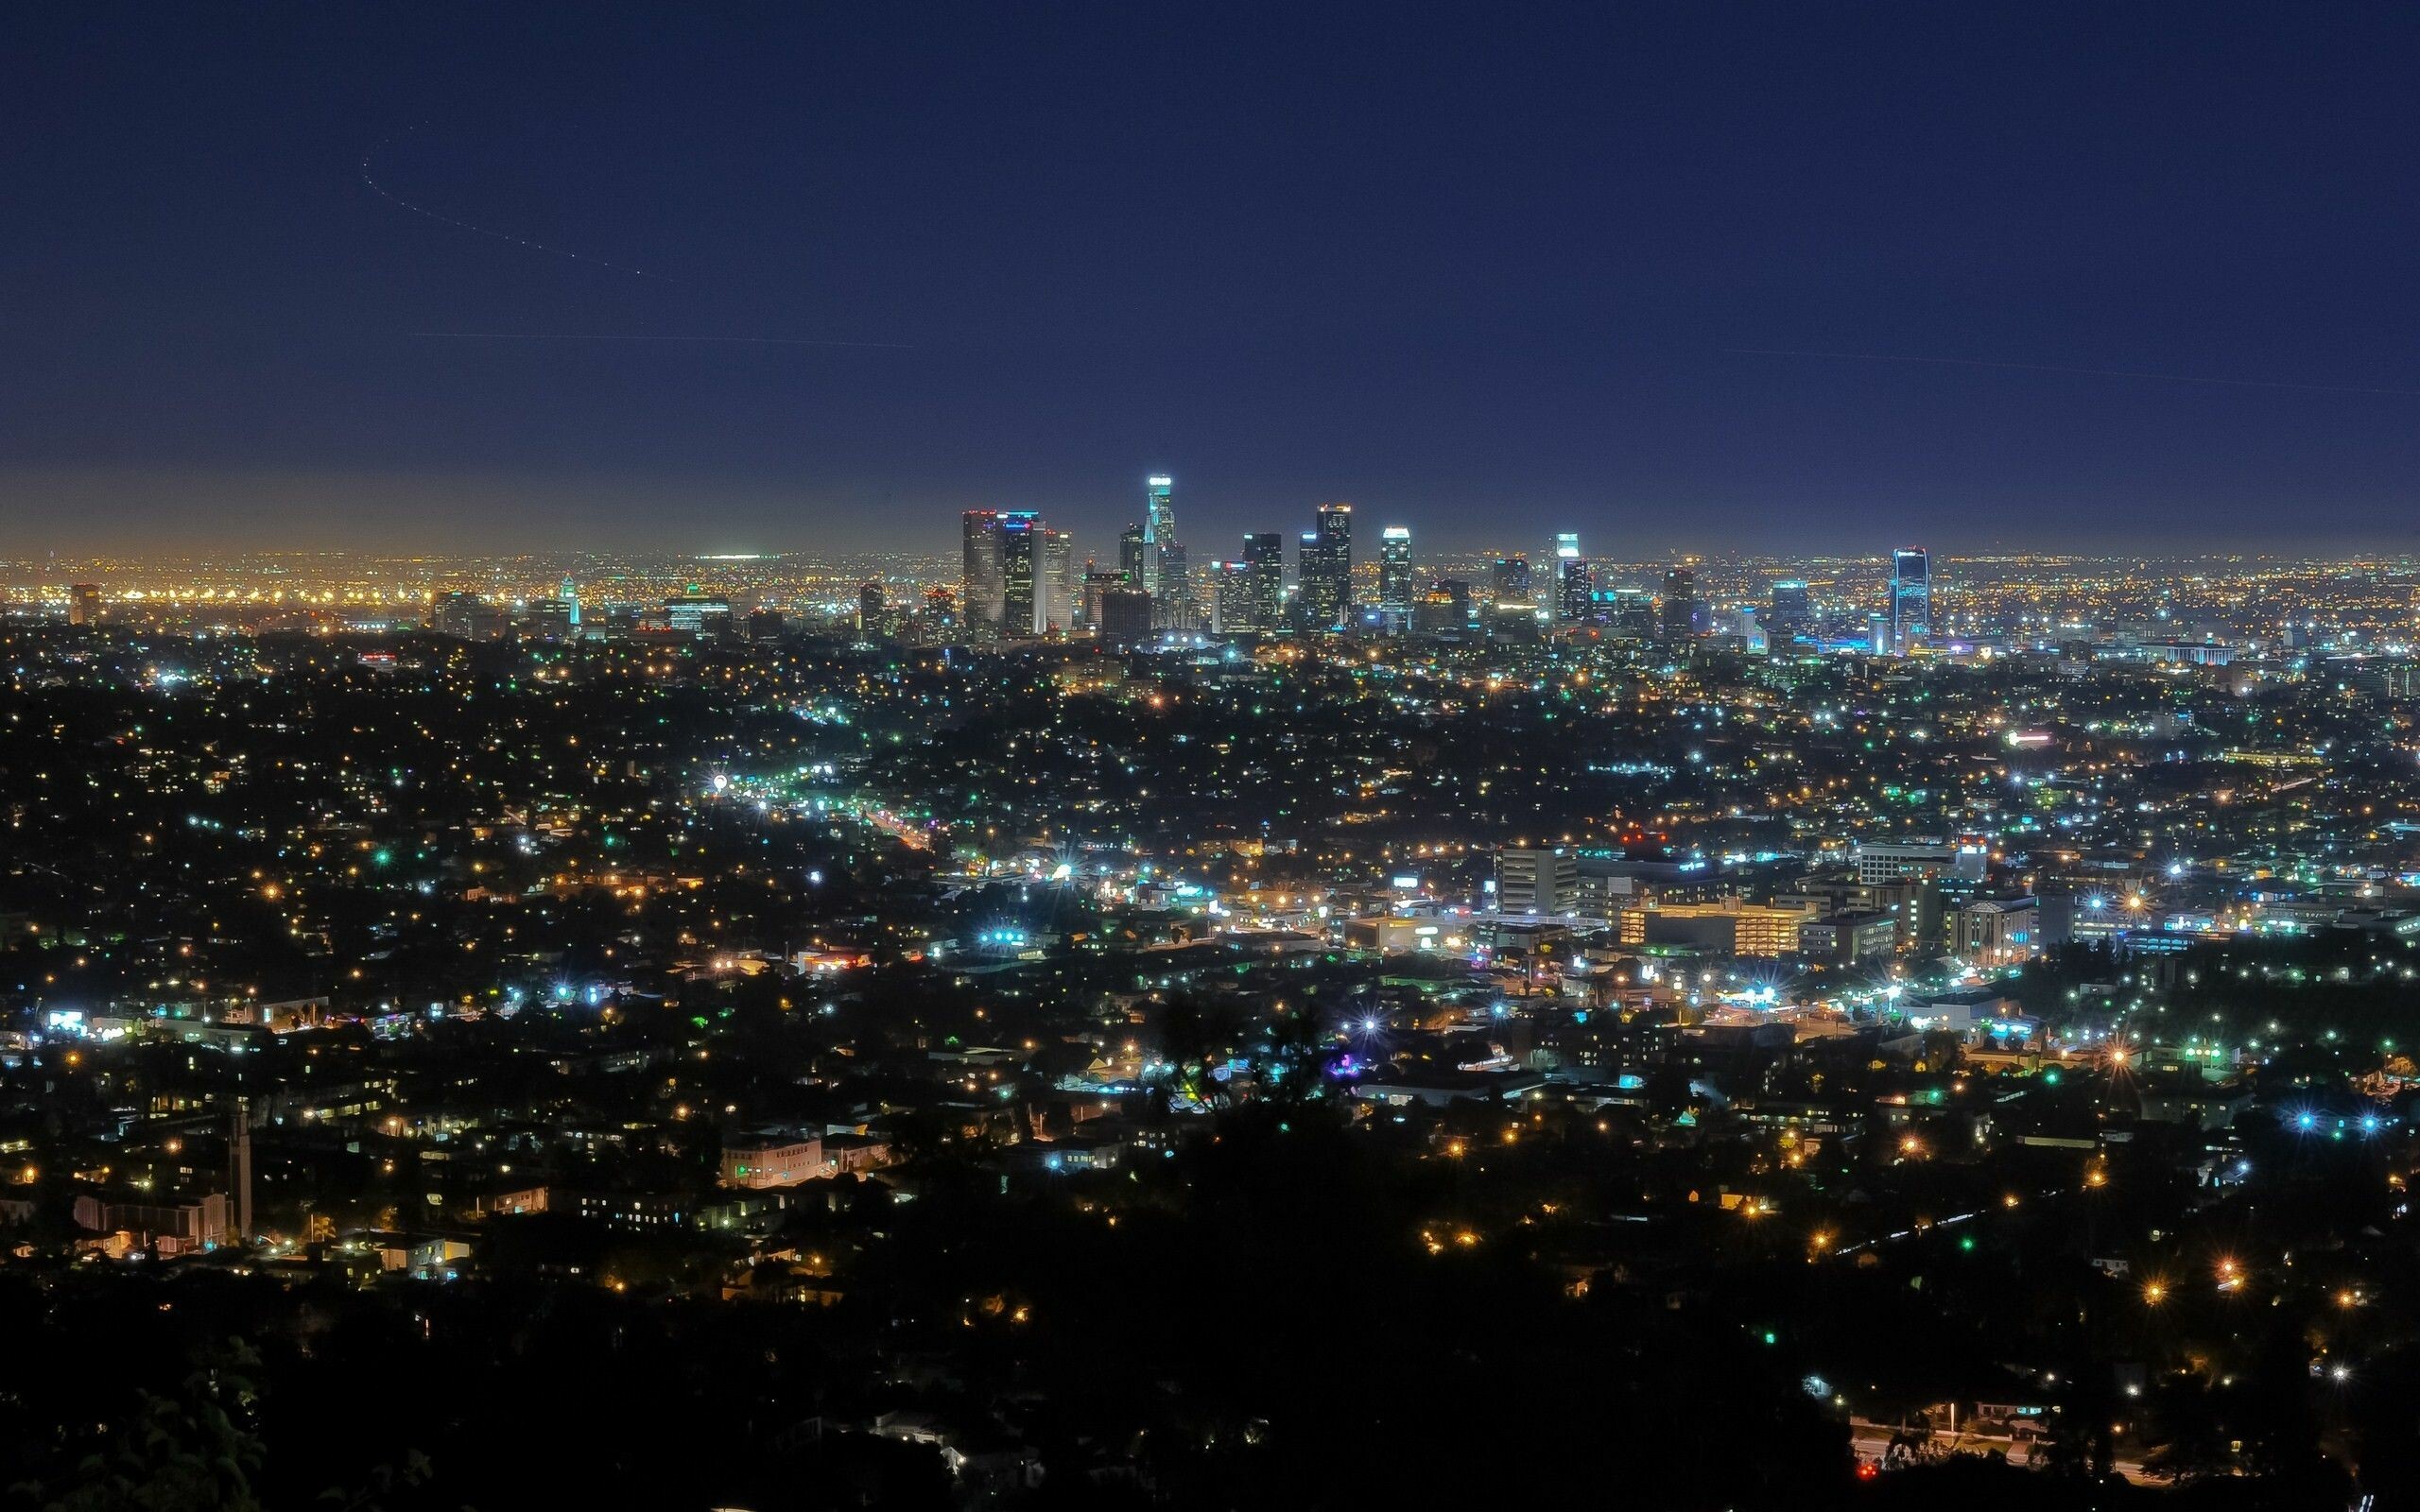 Los Angeles City Wallpaper: HD, 4K, 5K for PC and Mobile. Download free image for iPhone, Android